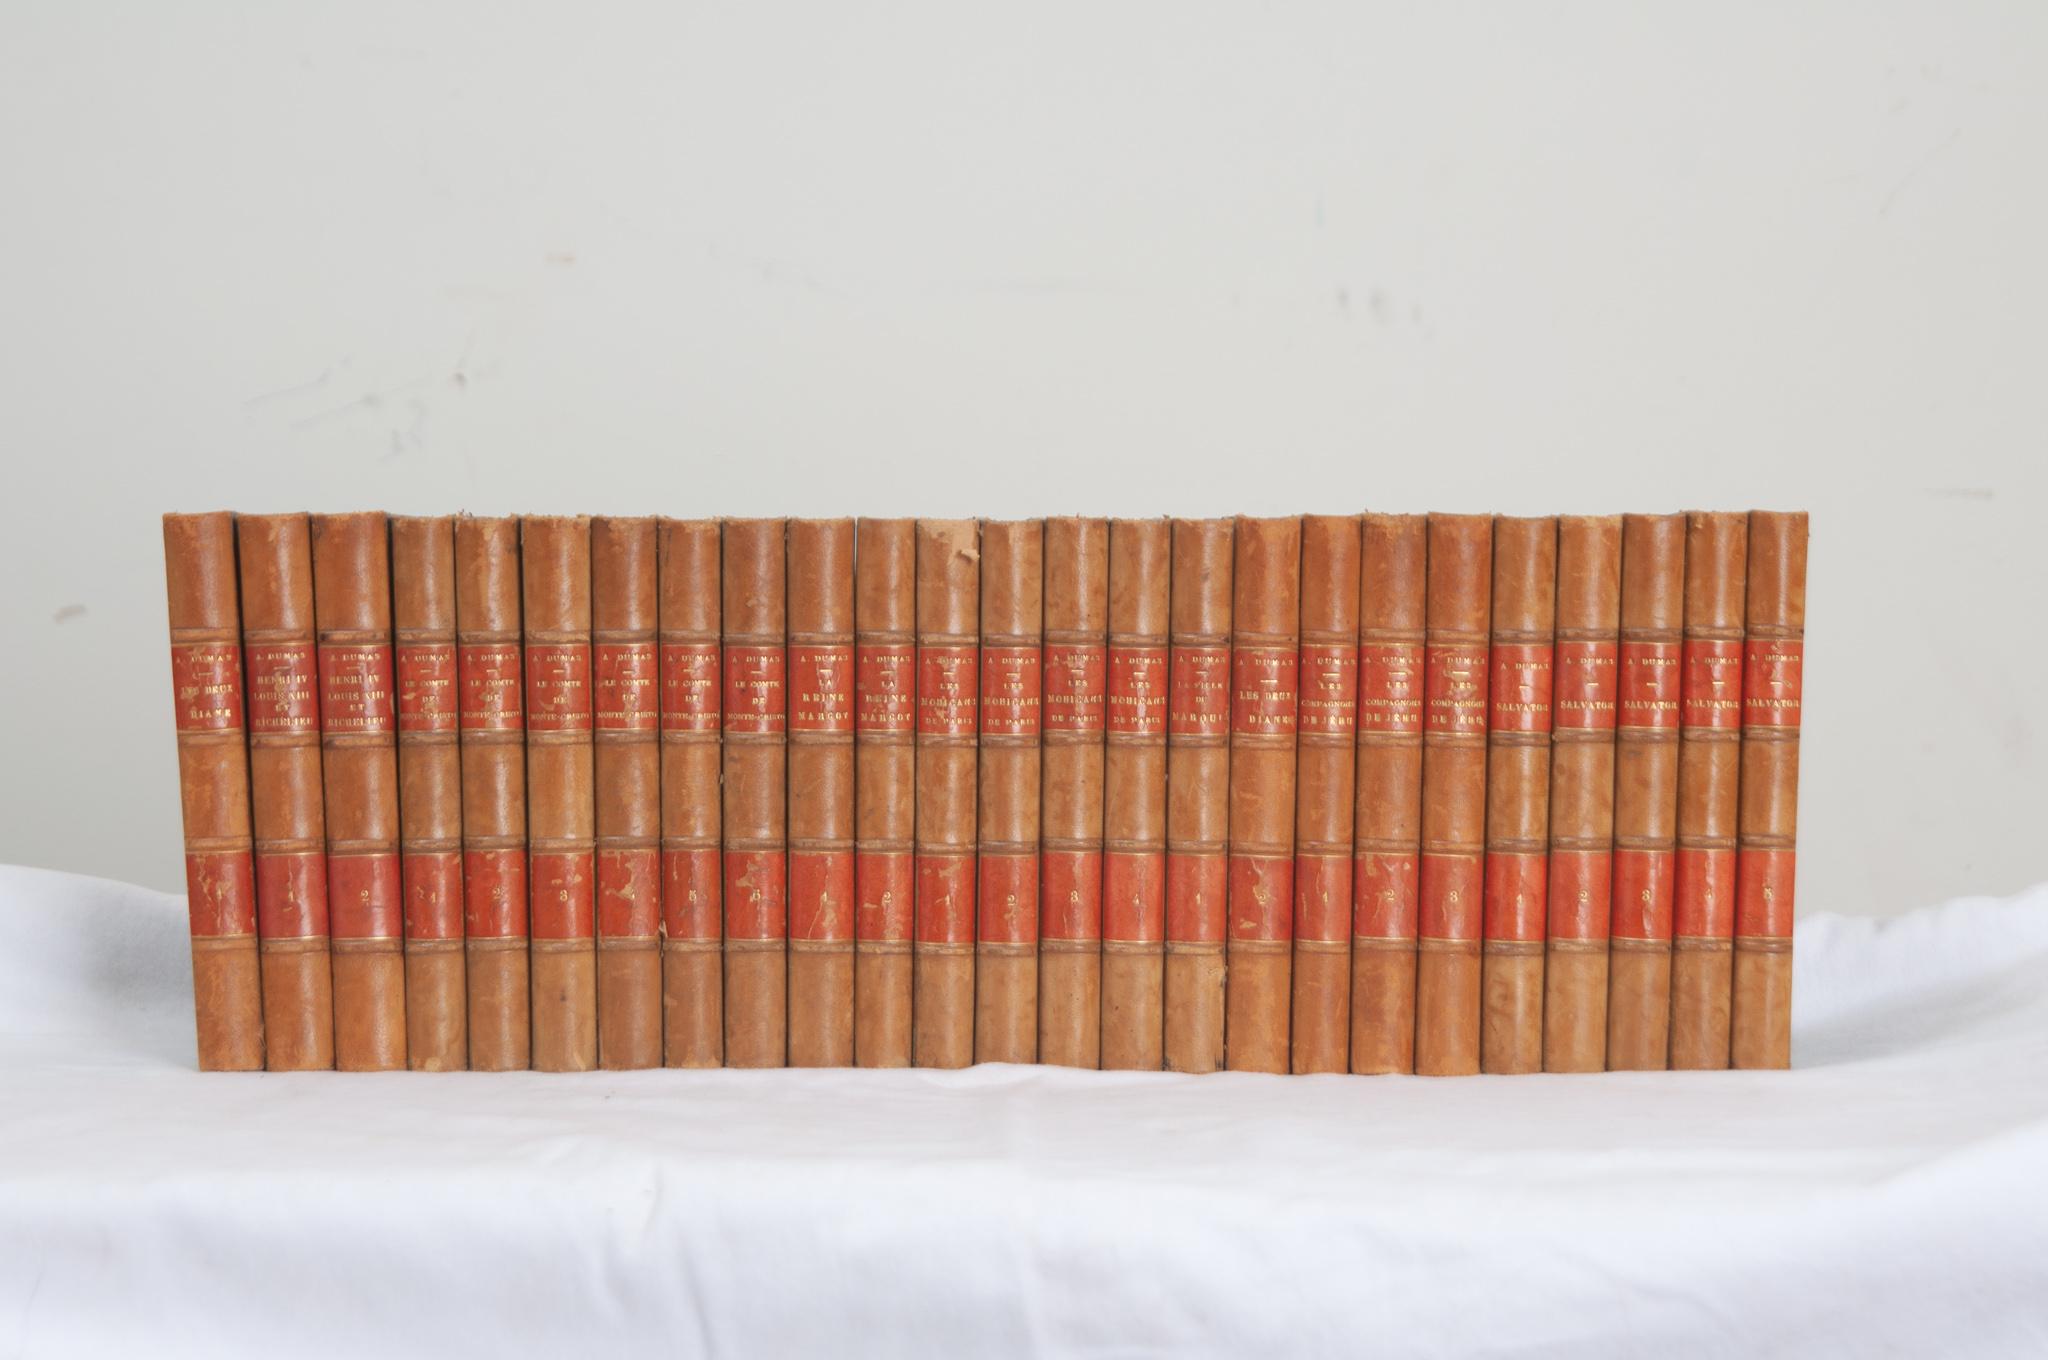 A collection of twenty-five volumes of works by French author Alexandre Dumas. This set of books is bound in leather with gold lettering stating, title, and respective volume. Written in 1882, this set includes a majority of the author’s works.